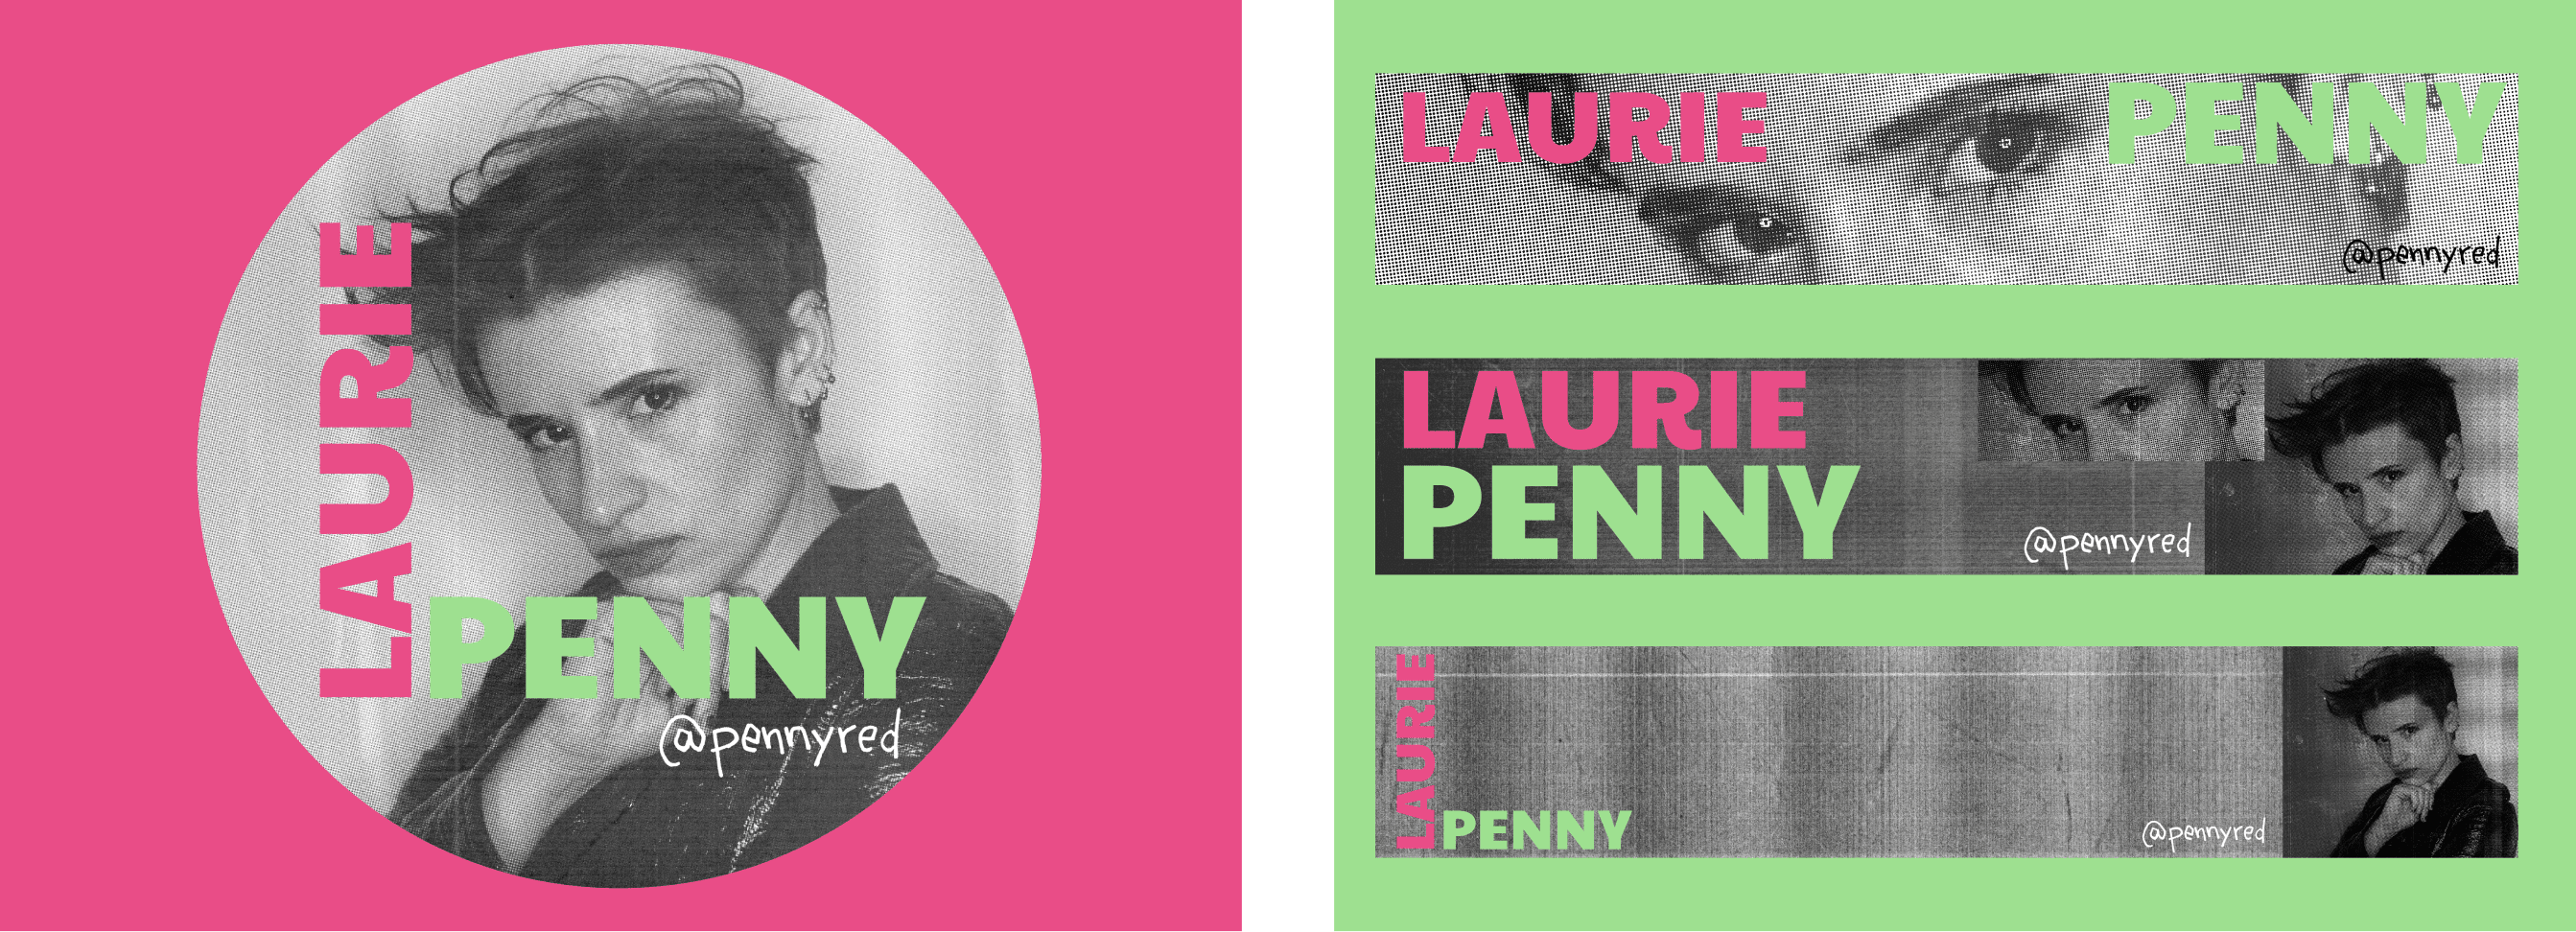 Logo and banners for journalist Laurie Penny's publication on Substack